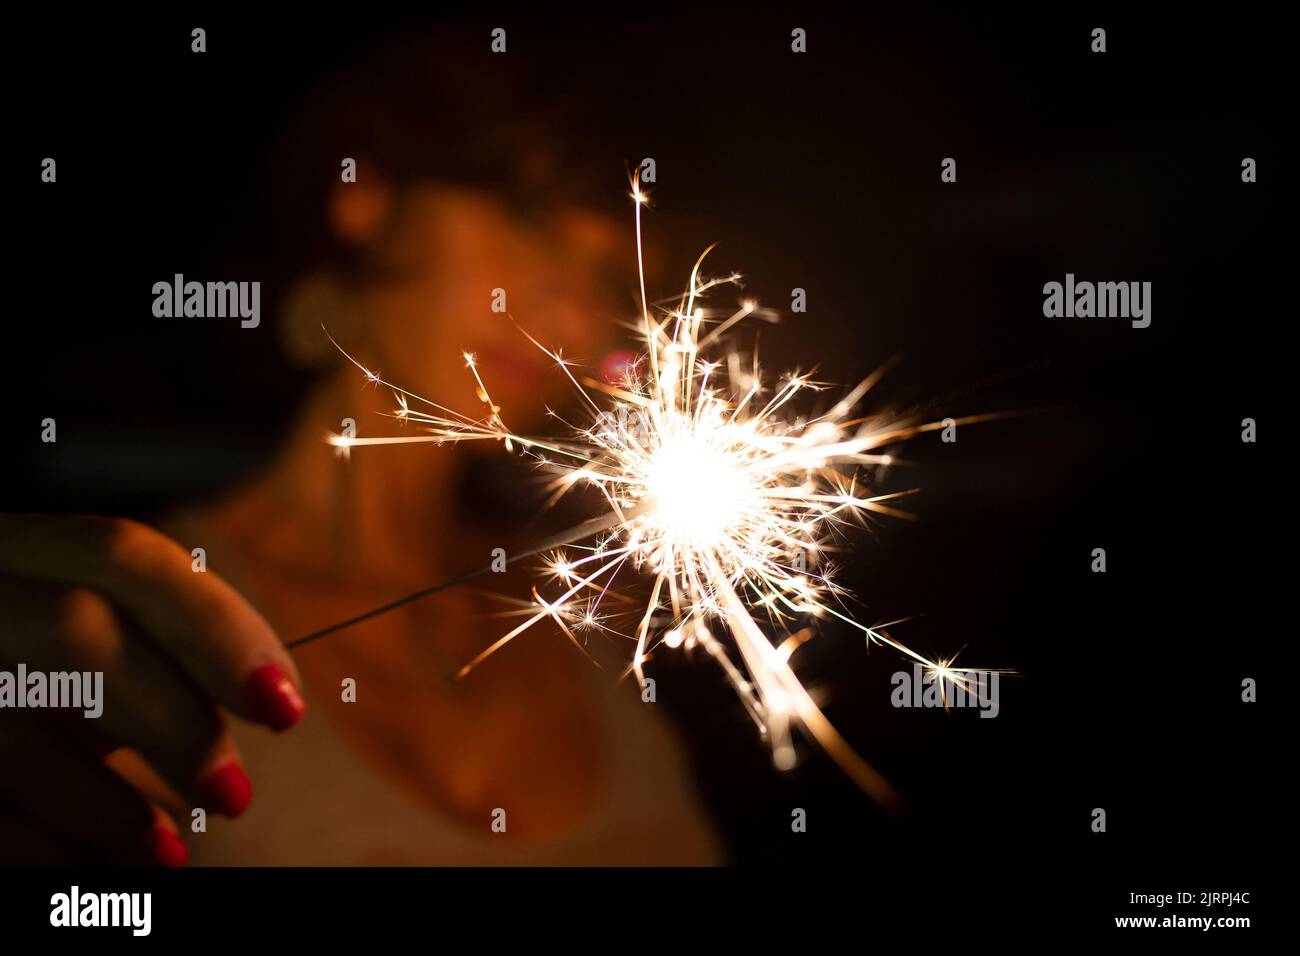 Attractive caucasian woman, blurred face, holding a burning sparkler or bengal in the dark. Copy space. Holidays or magic background or wallpaper. Stock Photo